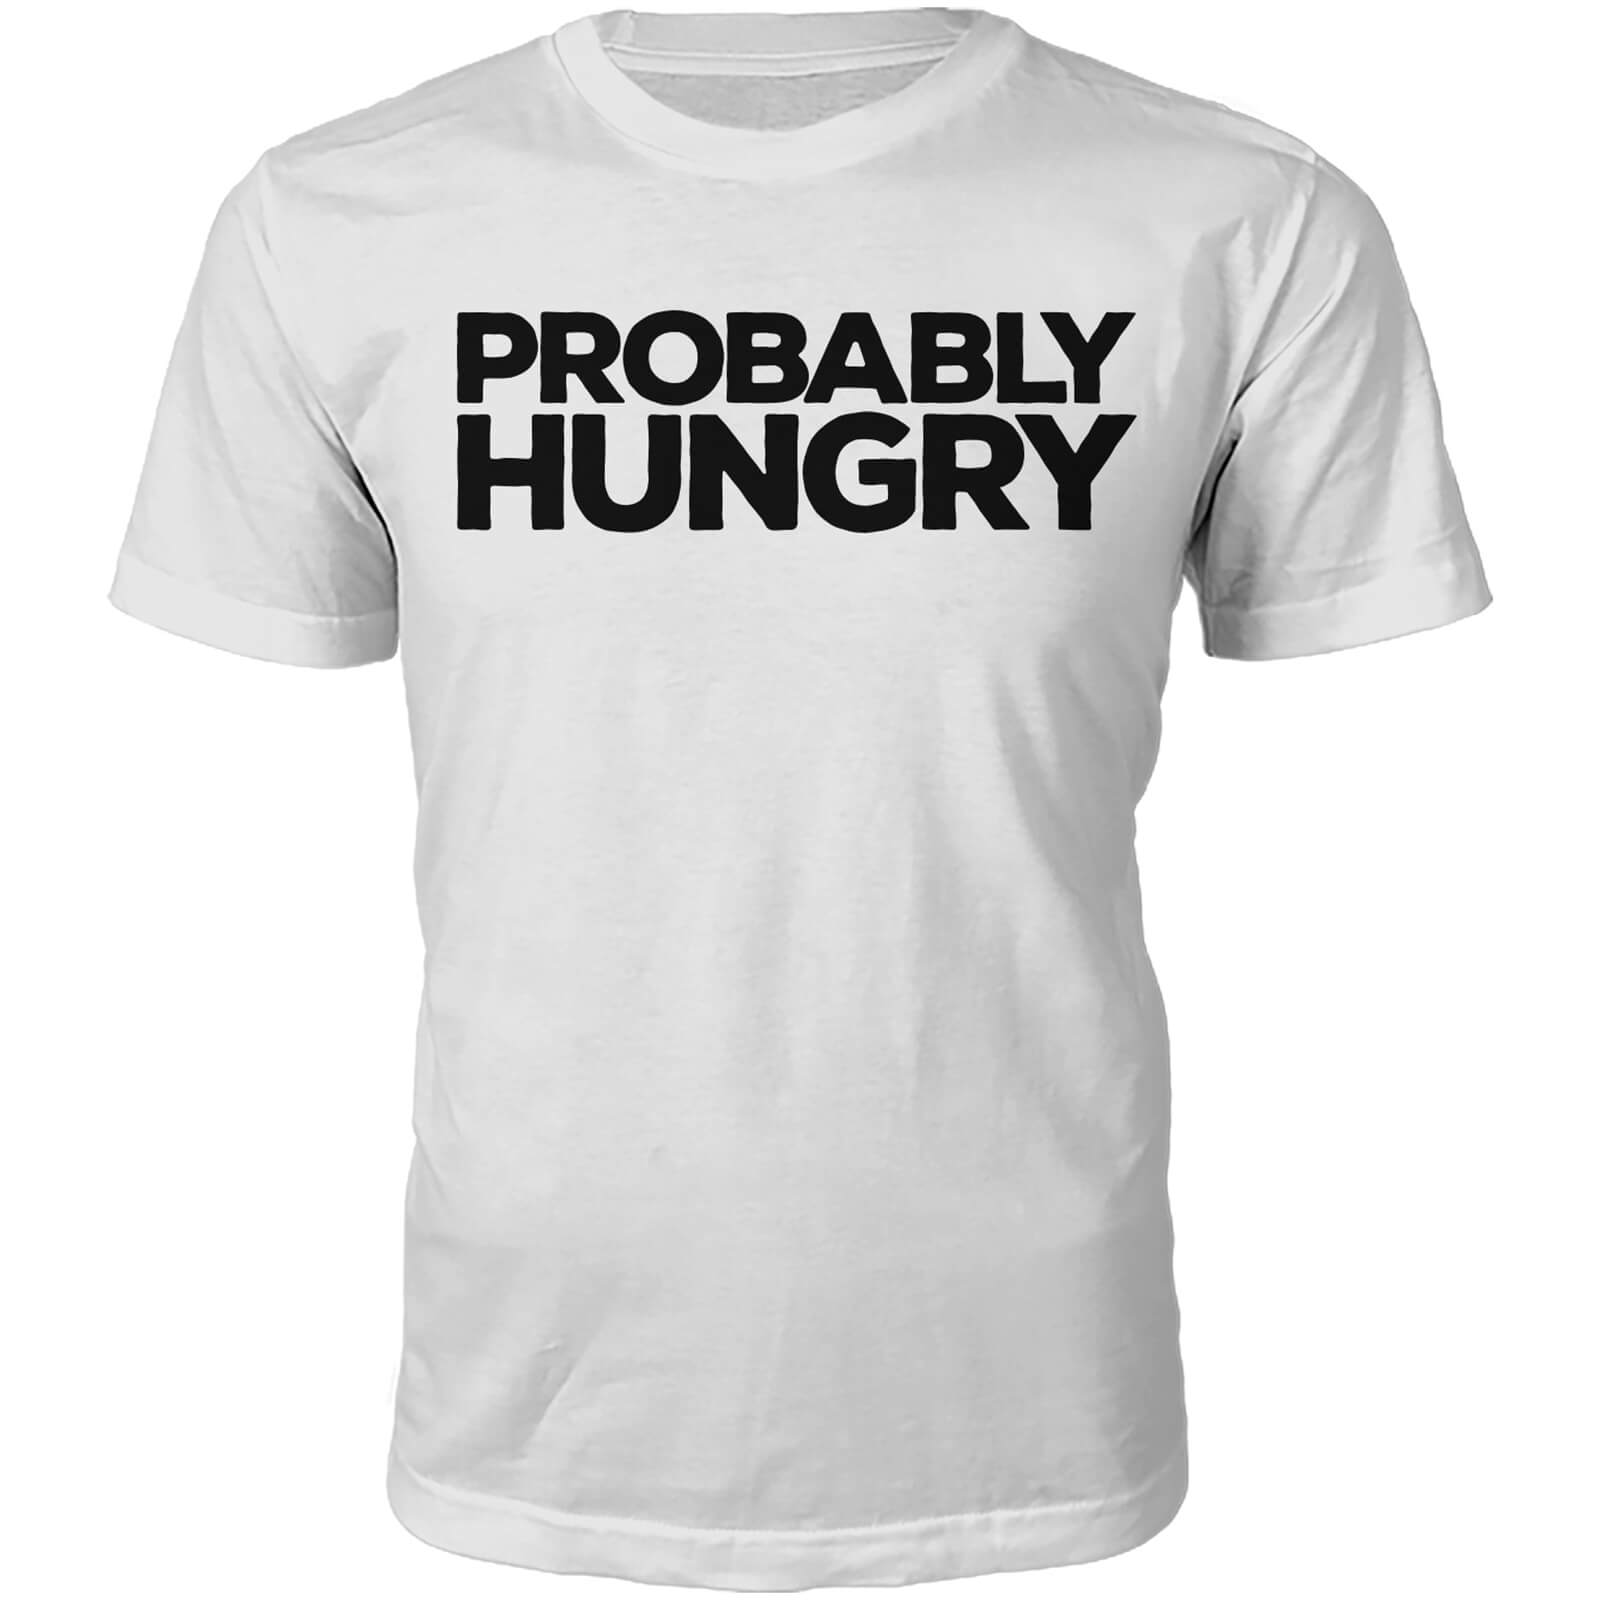 Probably Hungry Slogan T-Shirt - White - S - White